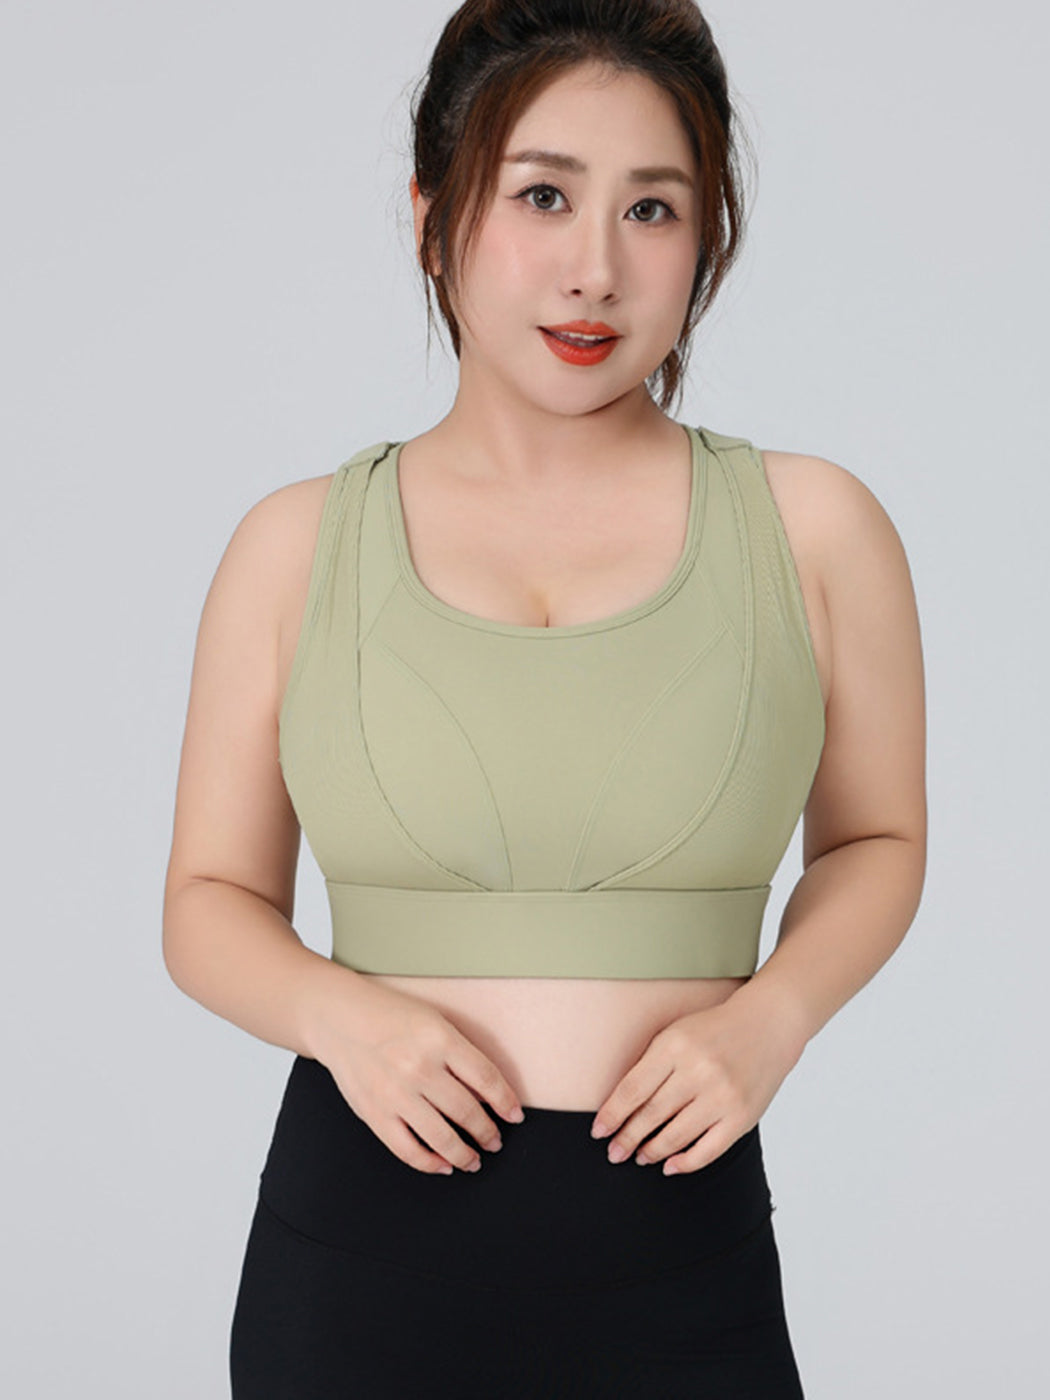 Adjustable Double-Layer Sports Bra with Anti-Sagging